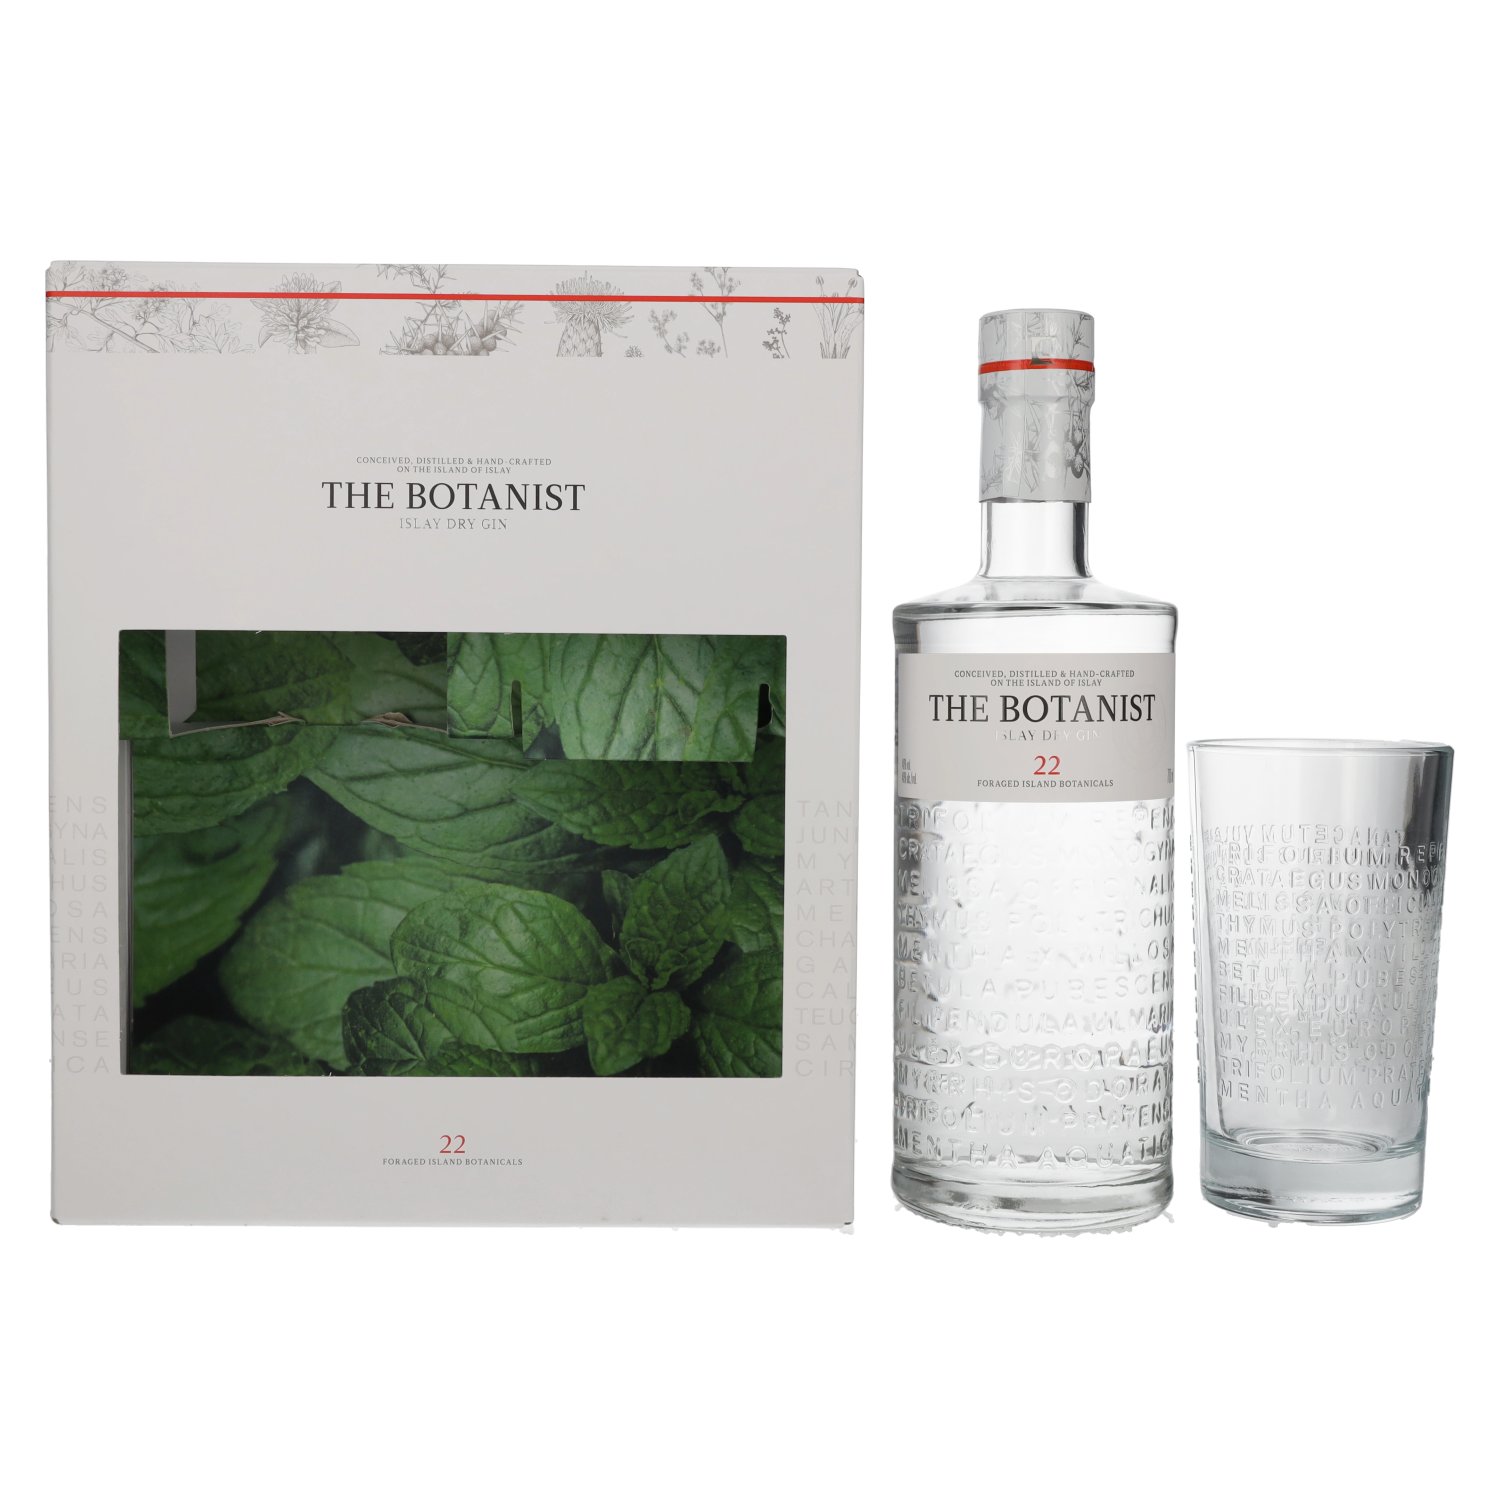 The Botanist Islay Dry Gin 46% Vol. 0,7l in Giftbox with Ritzenhof glass